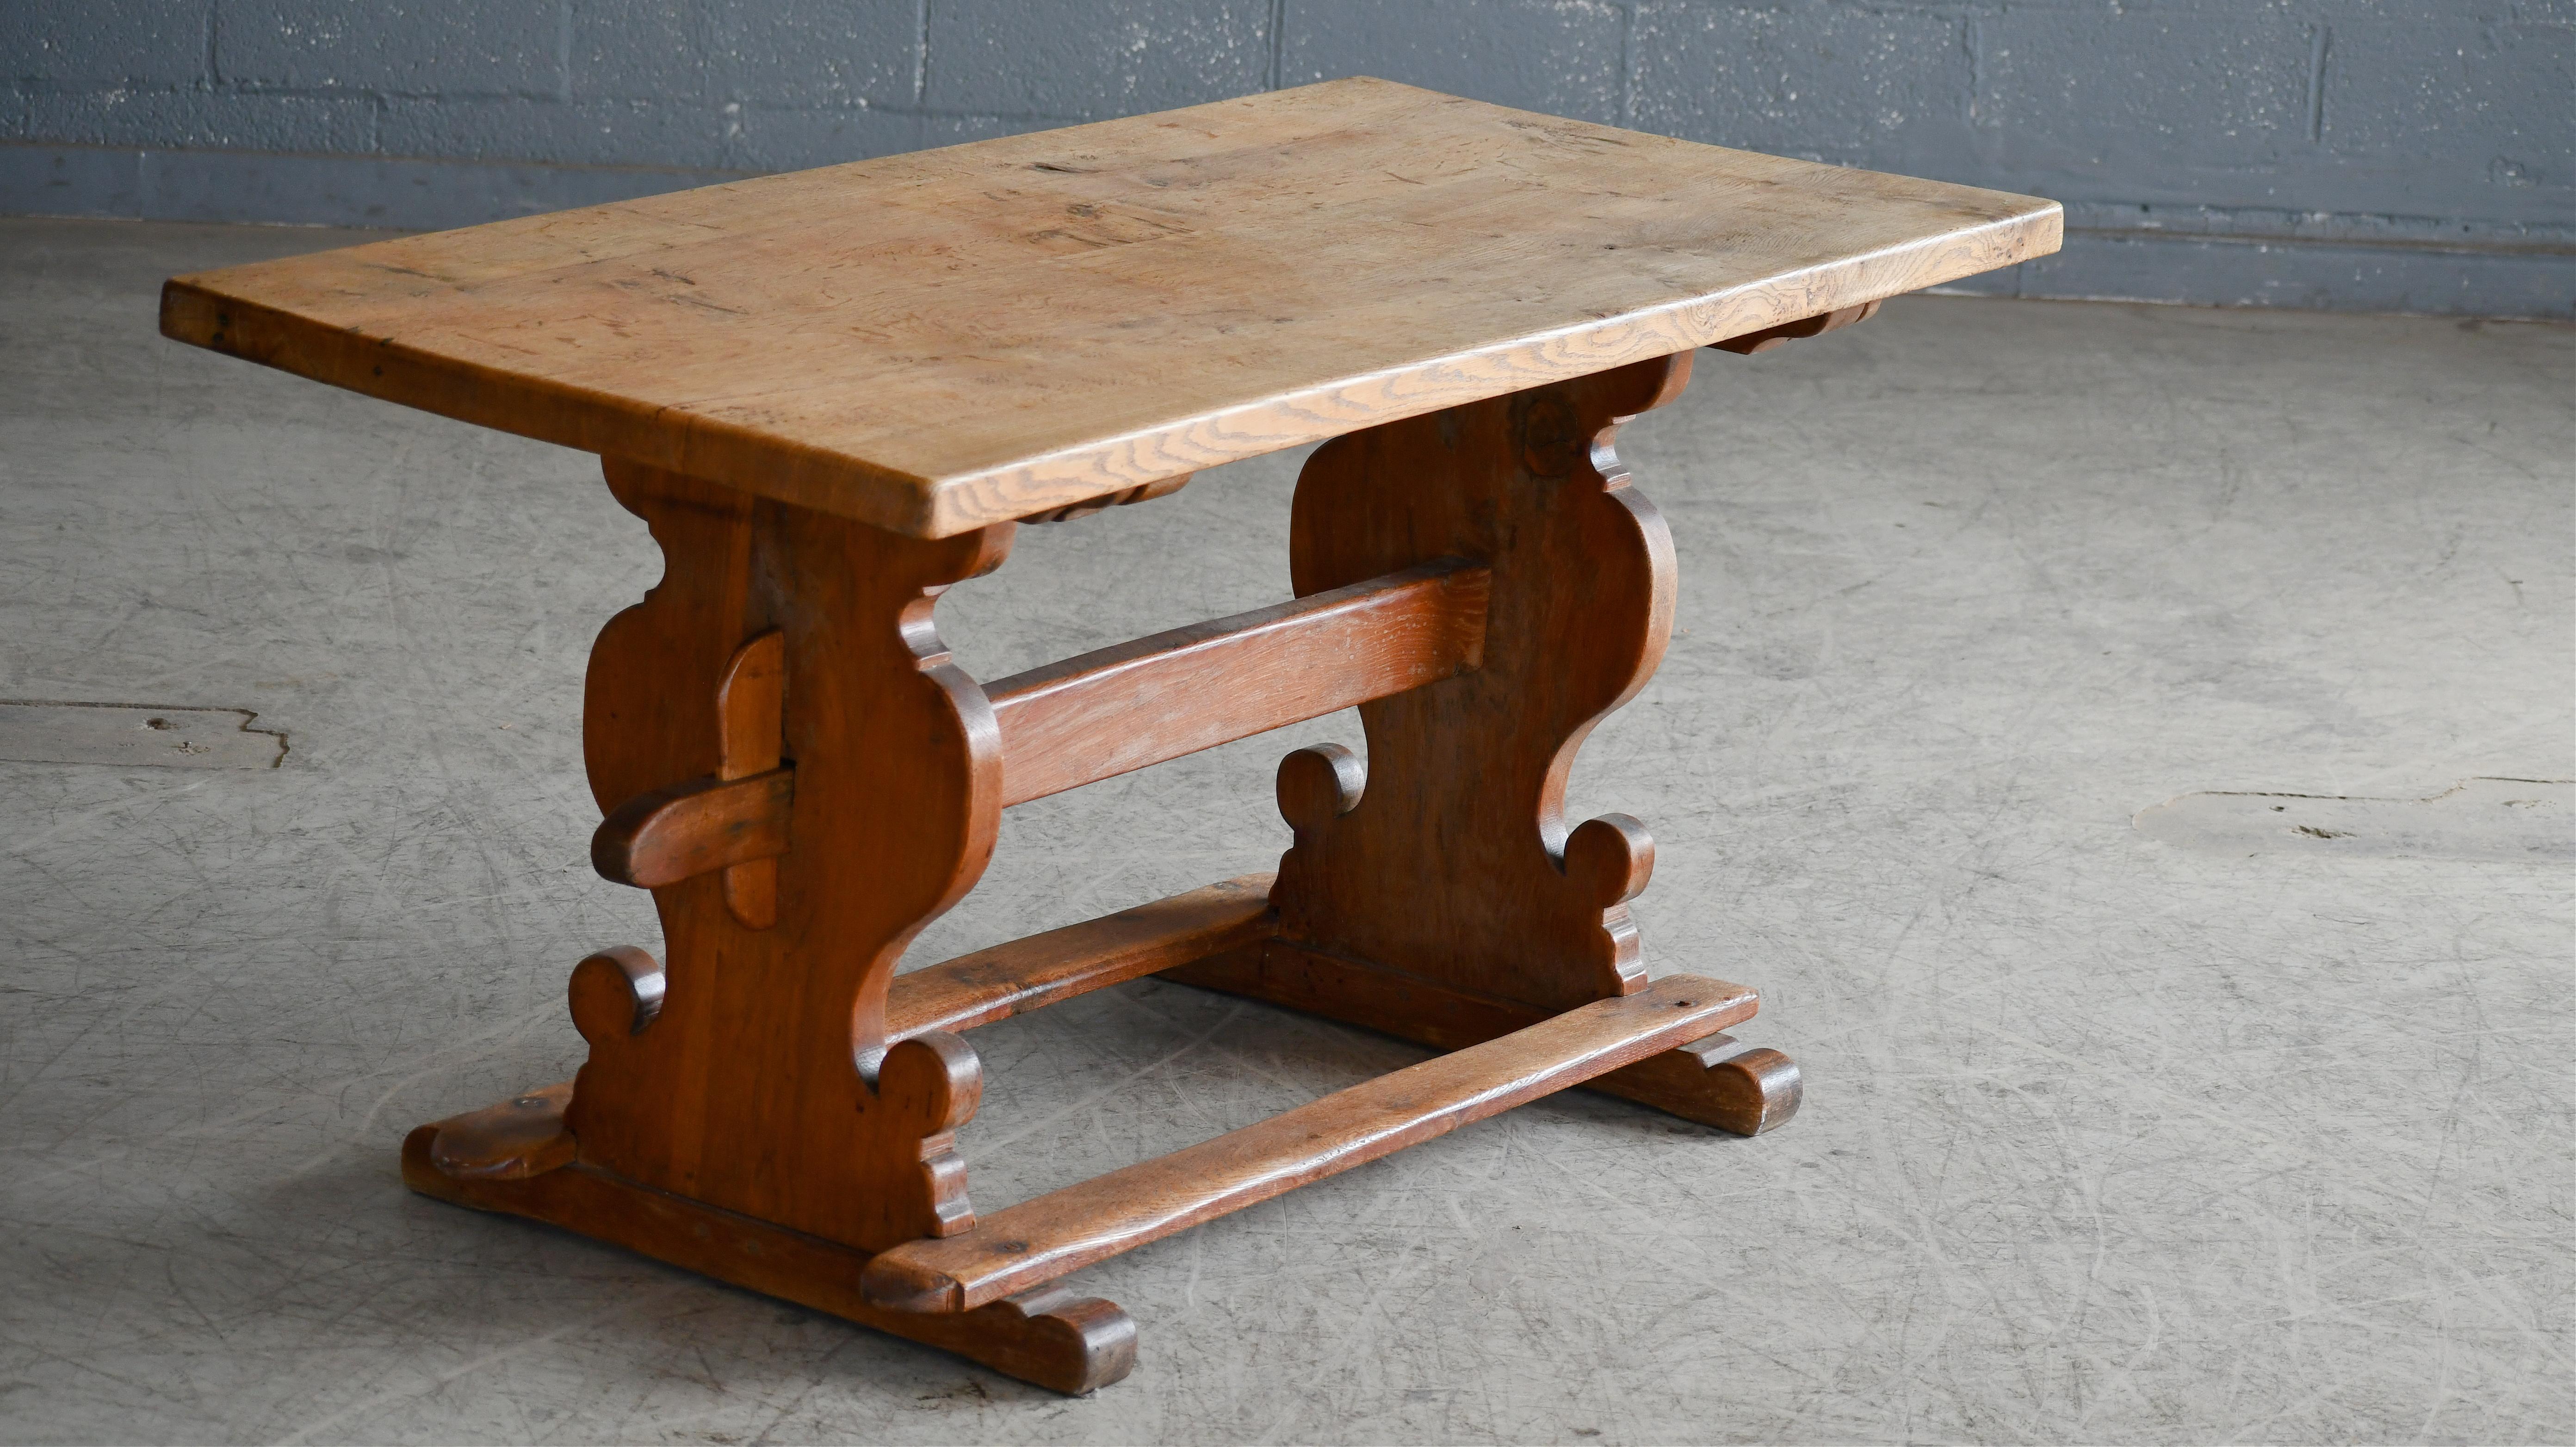 Great dining table in solid oak made in Denmark probably around 1900's. These style tables were common from about 1880 and found popularity again in the 1960's and 70's promoted by Designers as Henning Kjaernulff. This is an earlier version which